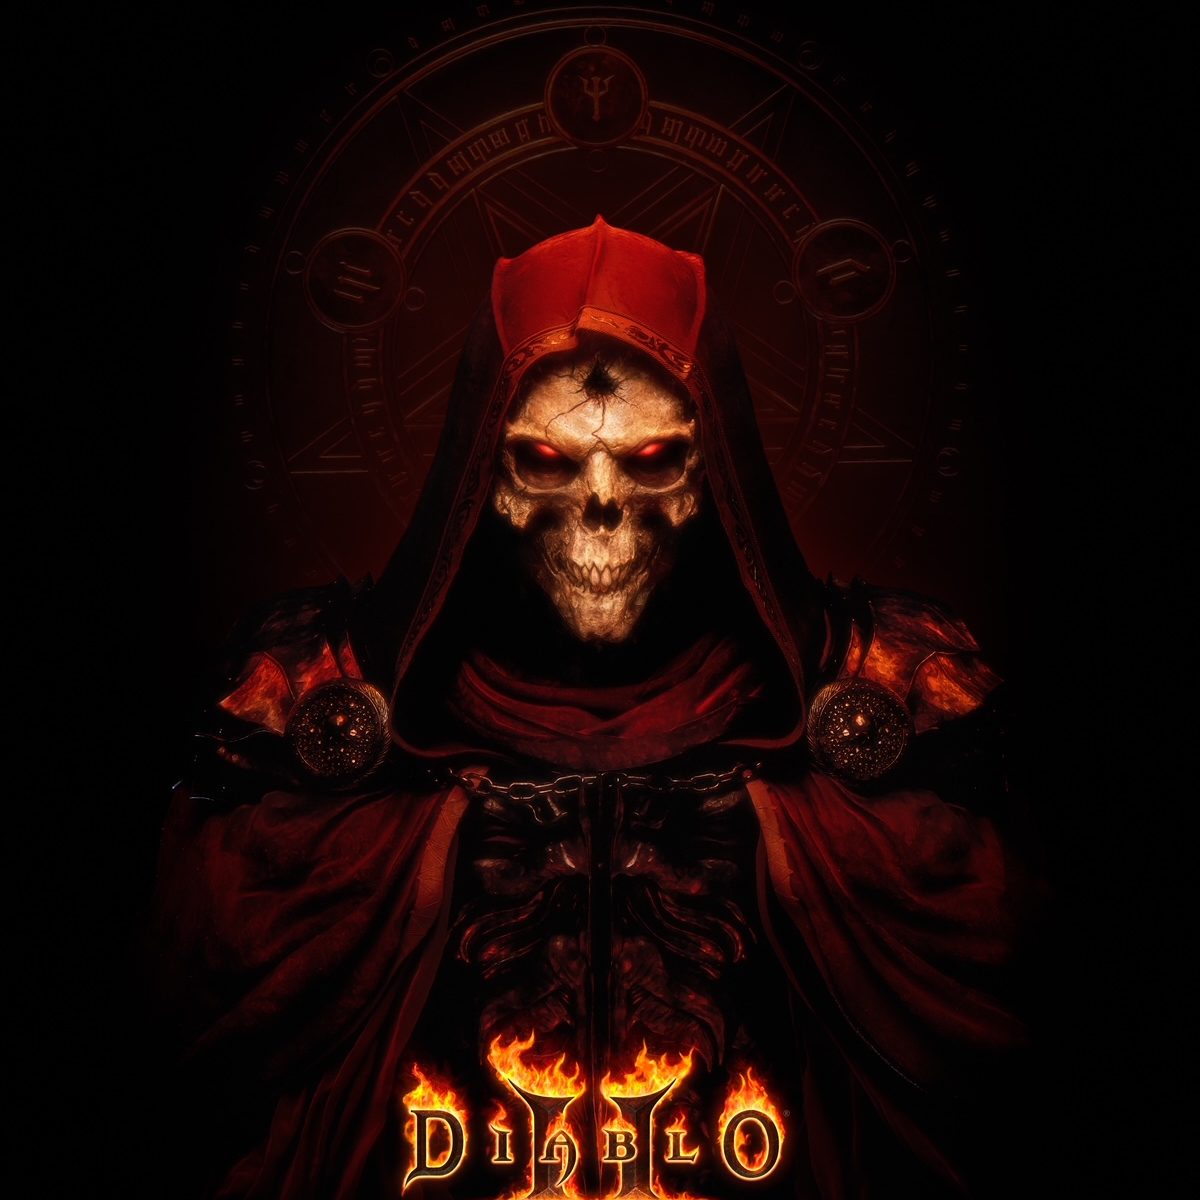 Image3 - Nerd Blog - Diablo Ii: Resurrected - A Real Labor Of Love And Respect By Billelis